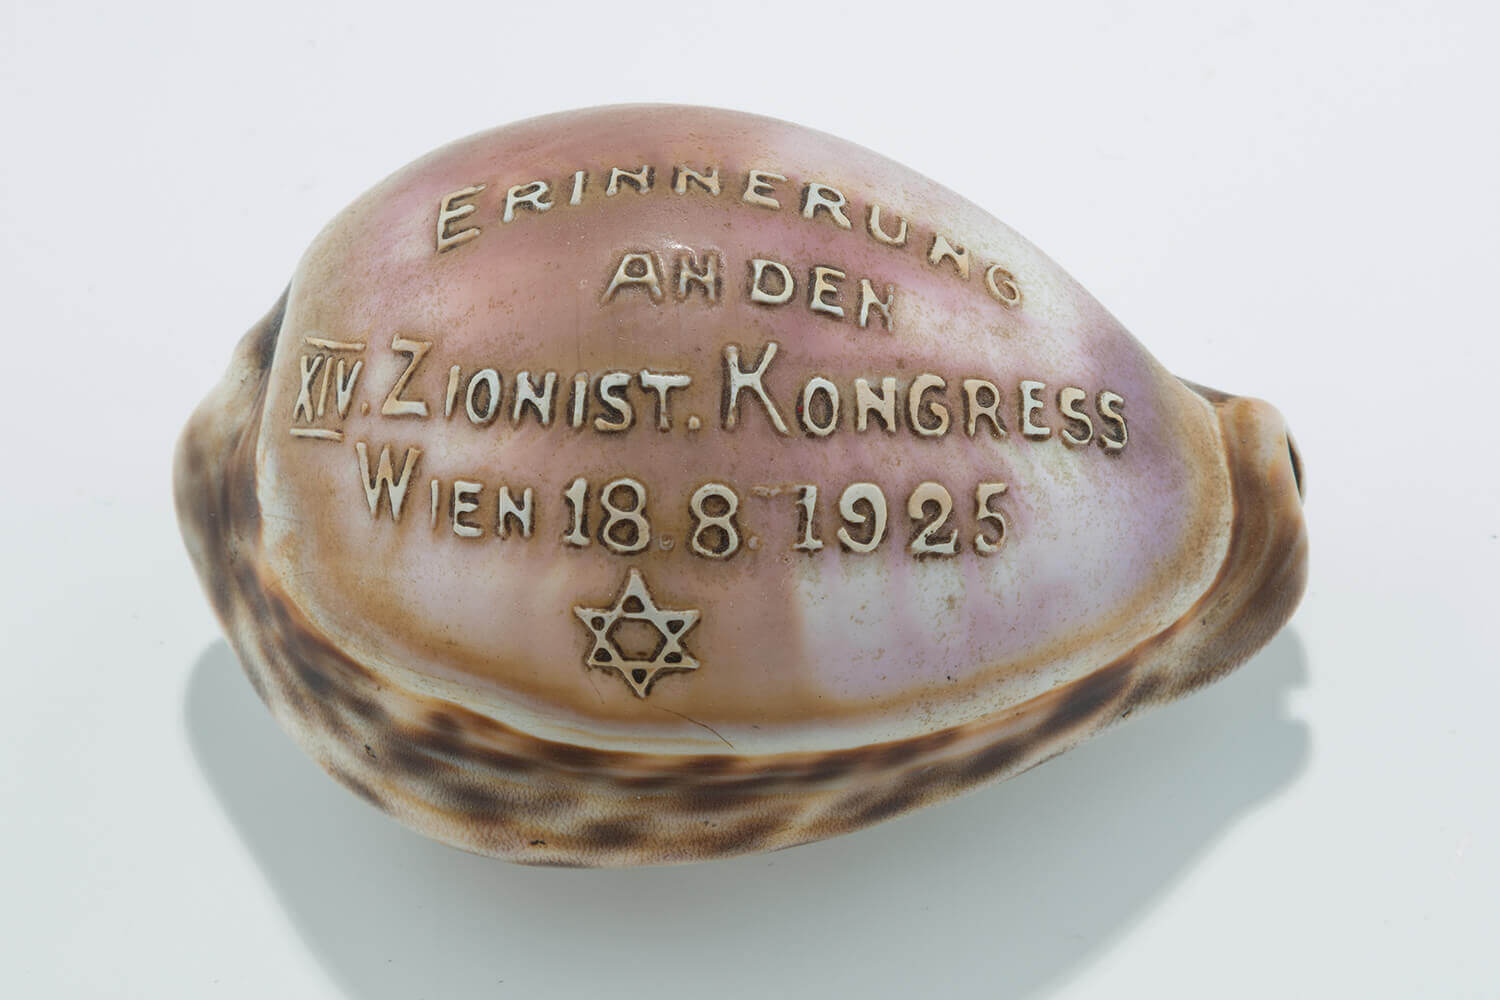 003. A CARVED COWRY SHELL COMMORATING THE 14TH ZIONIST CONGRESS IN VIENNA